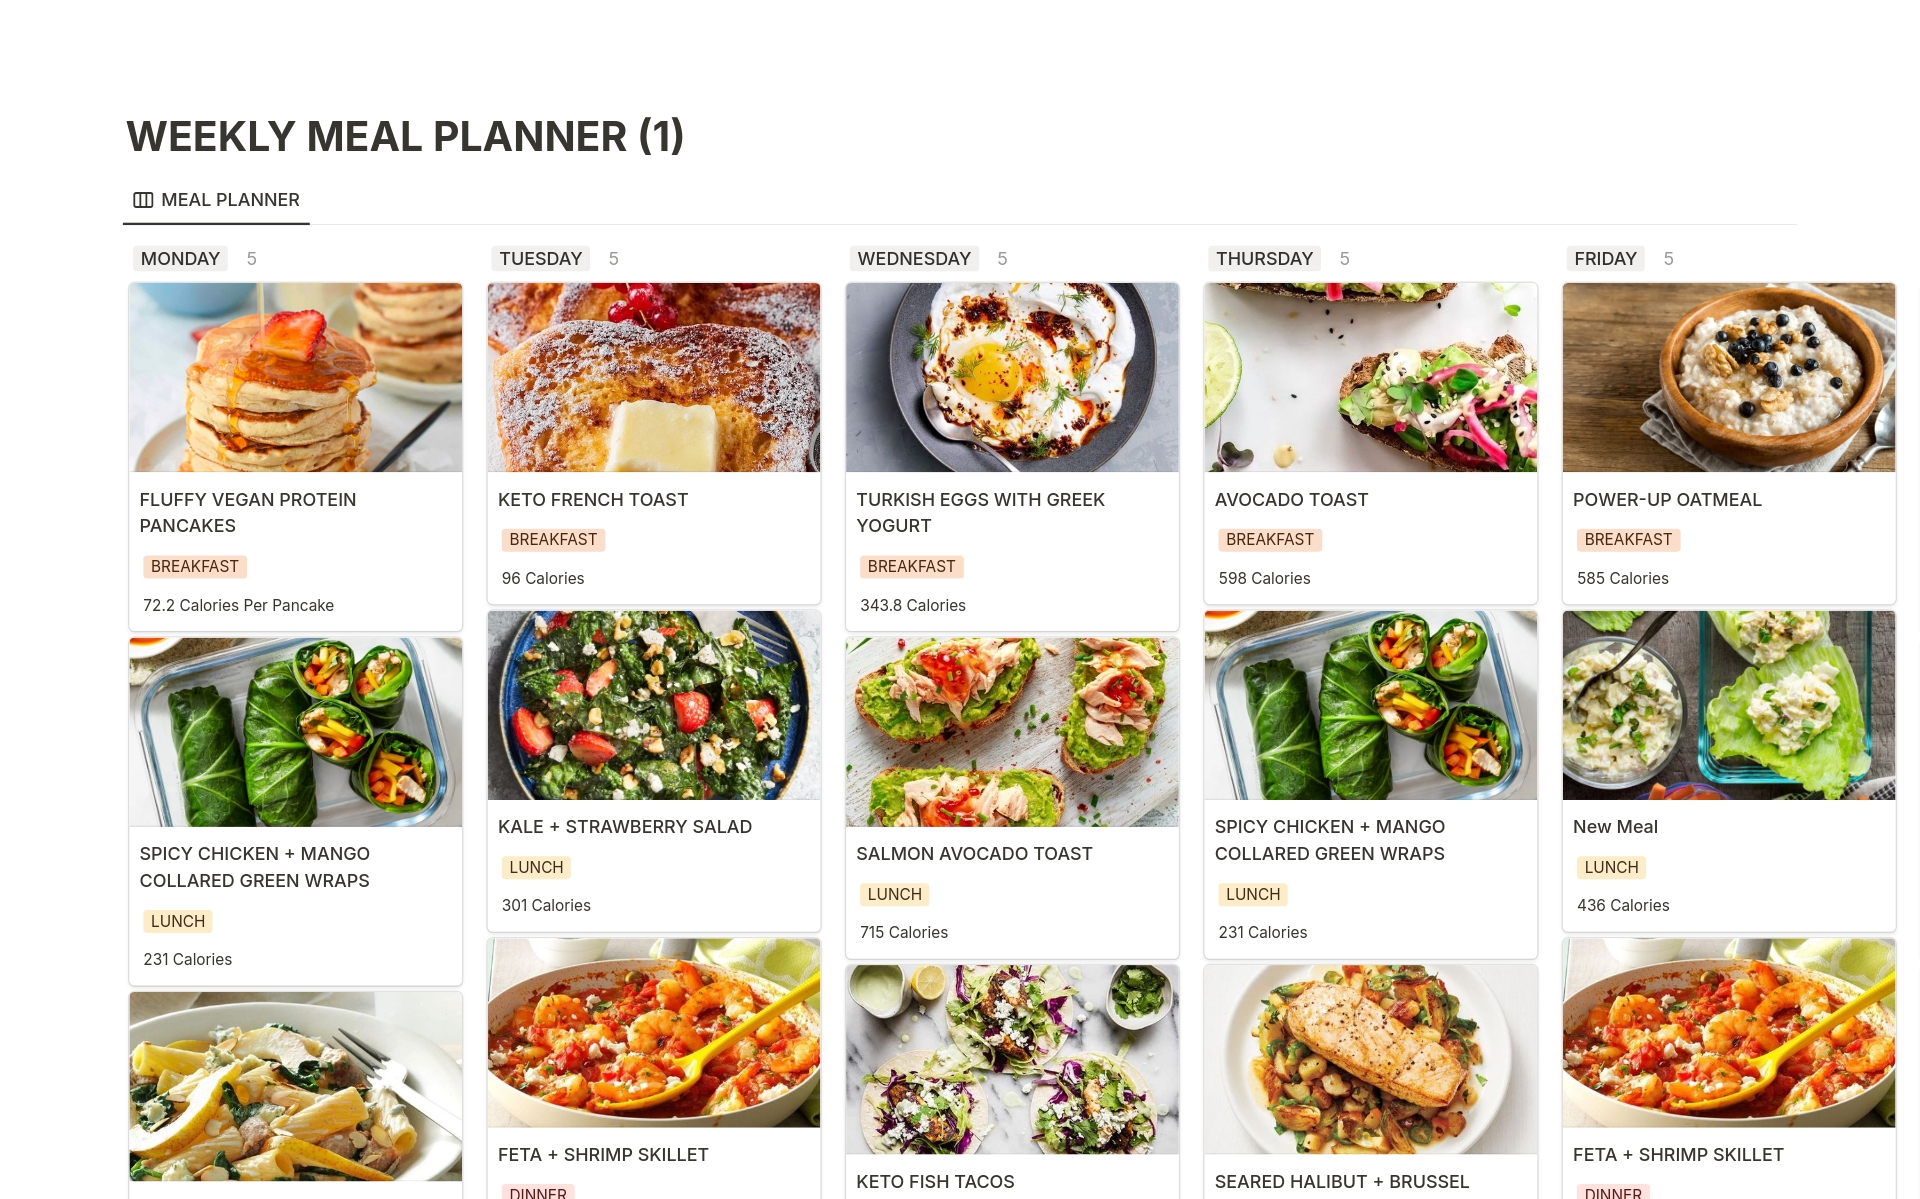 Get ready for your diet with our simple and user-friendly weekly meal planner. Track your calories and macros while having them displayed in a beautifully colourful way! Fully customizable. Start planning your meals ahead of time starting today!